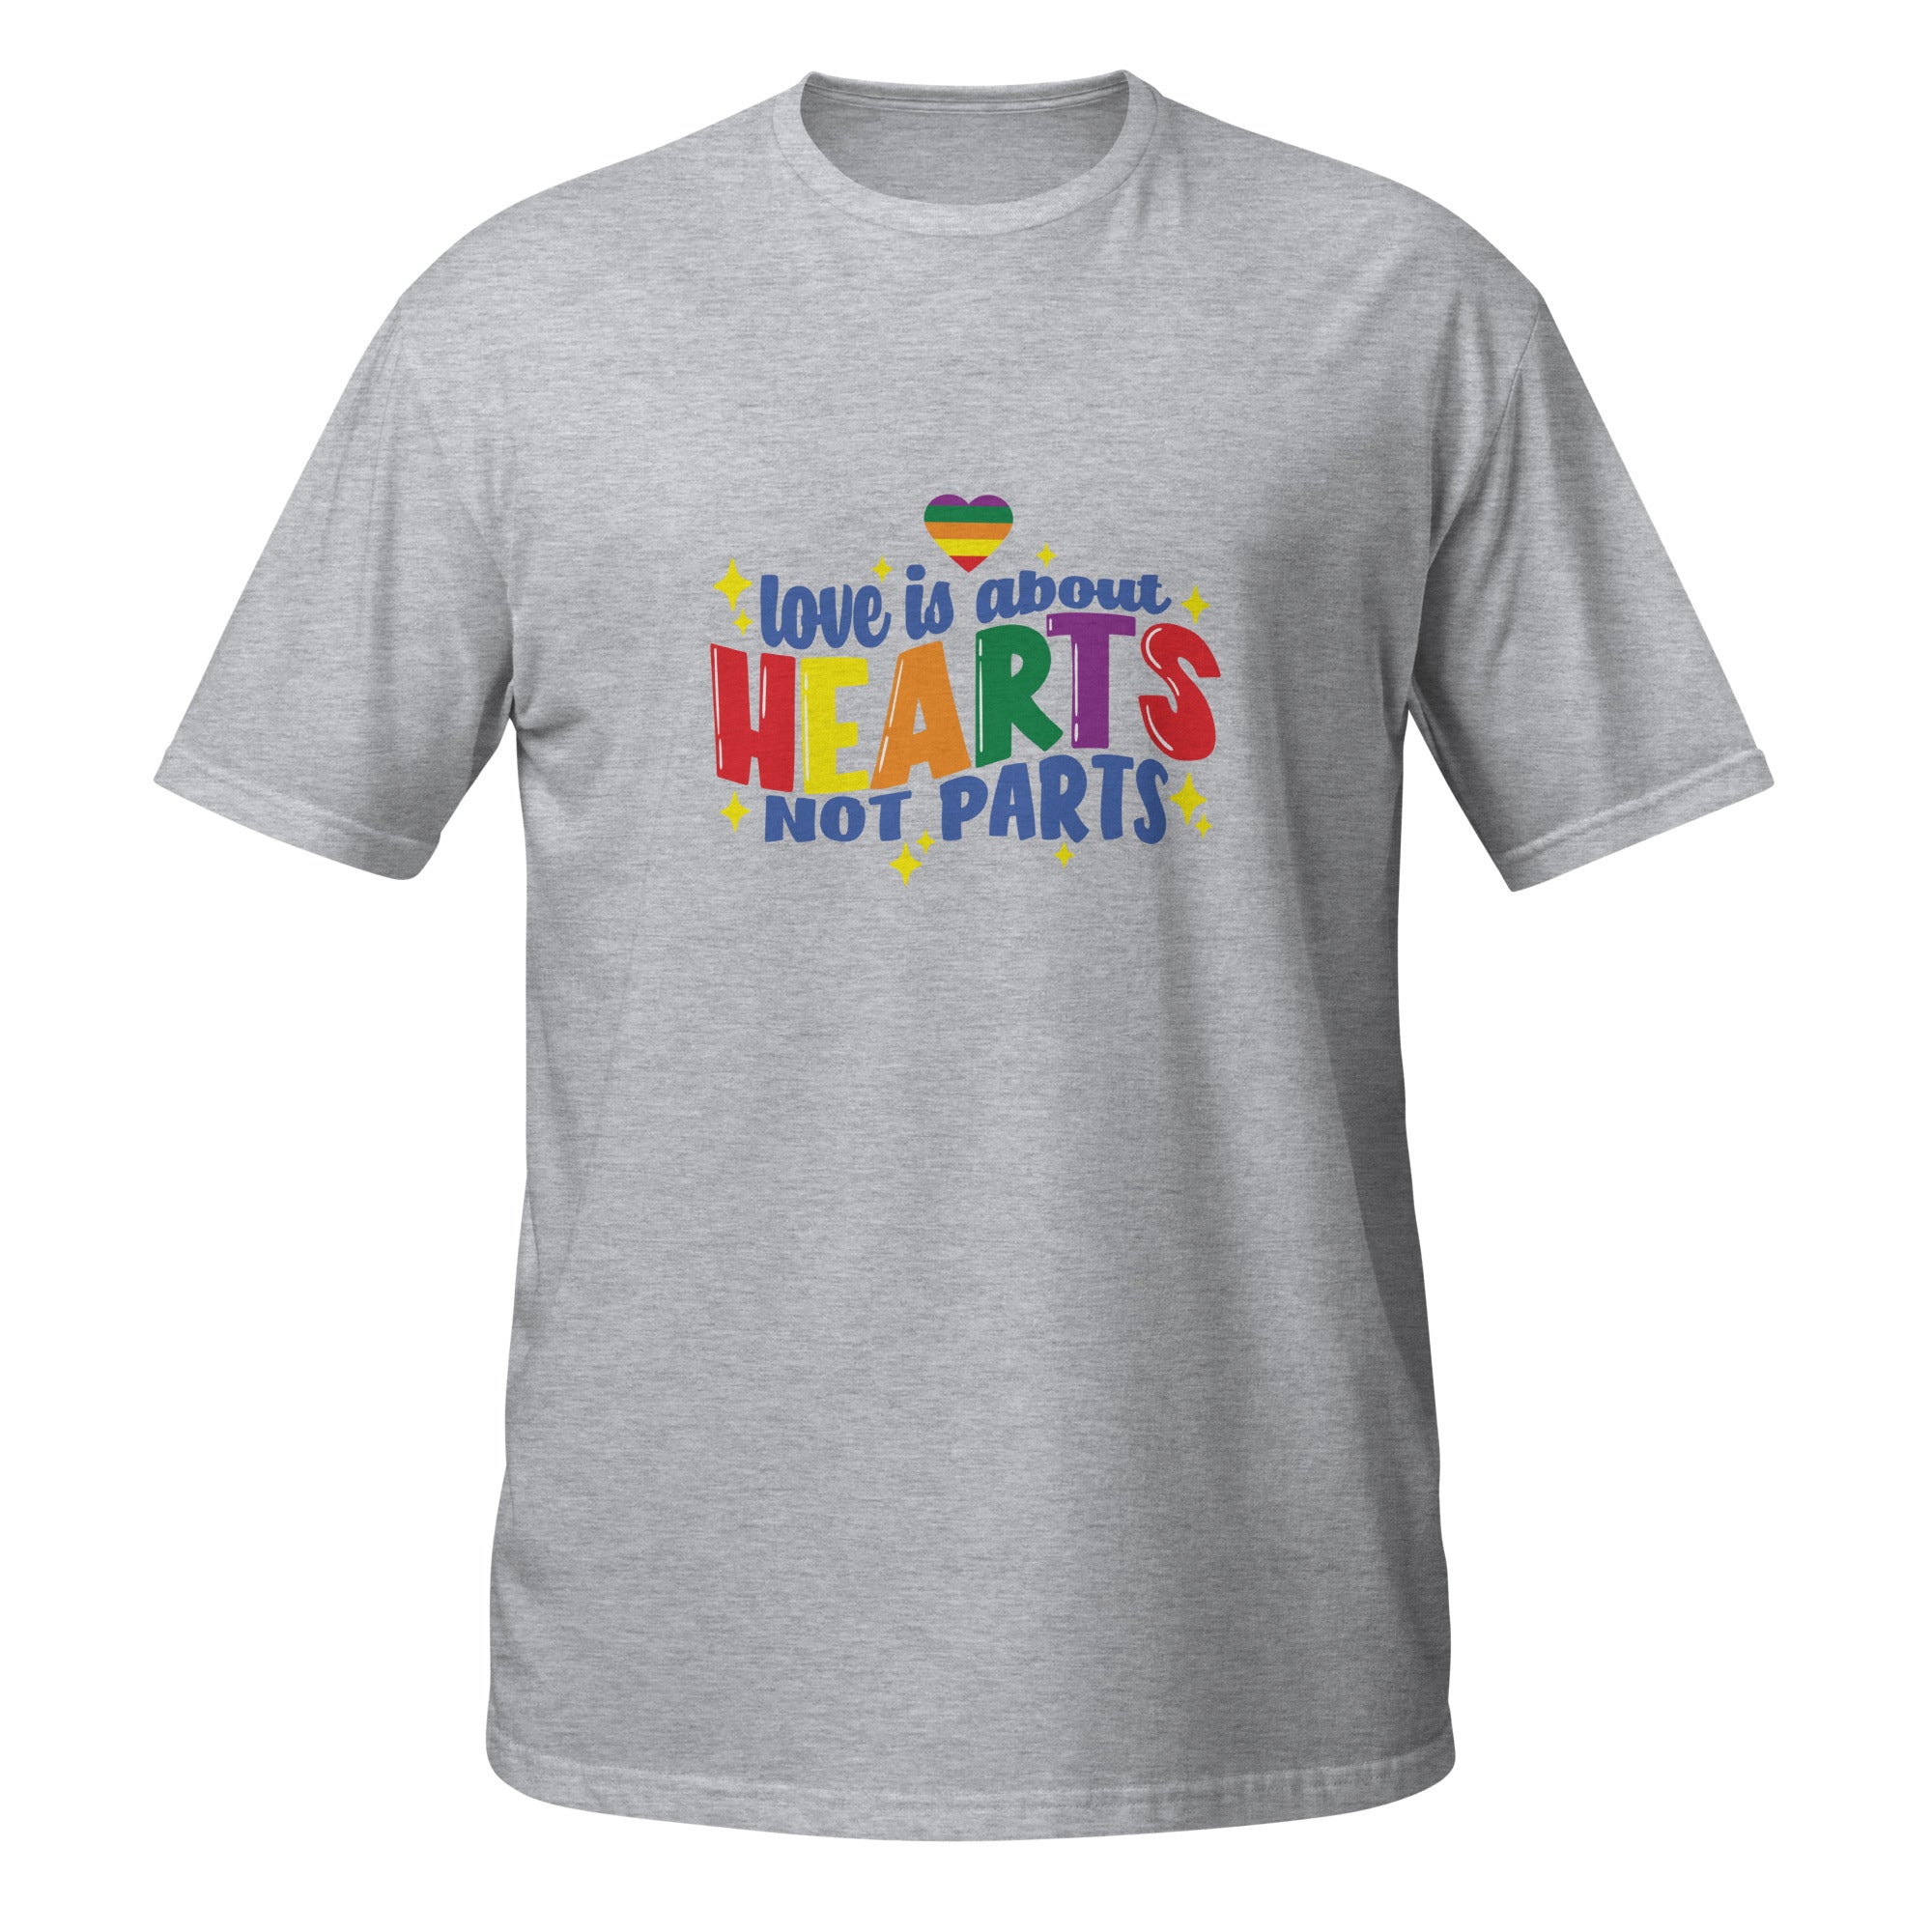 Short-Sleeve Unisex T-Shirt- Love is about hearts not parts